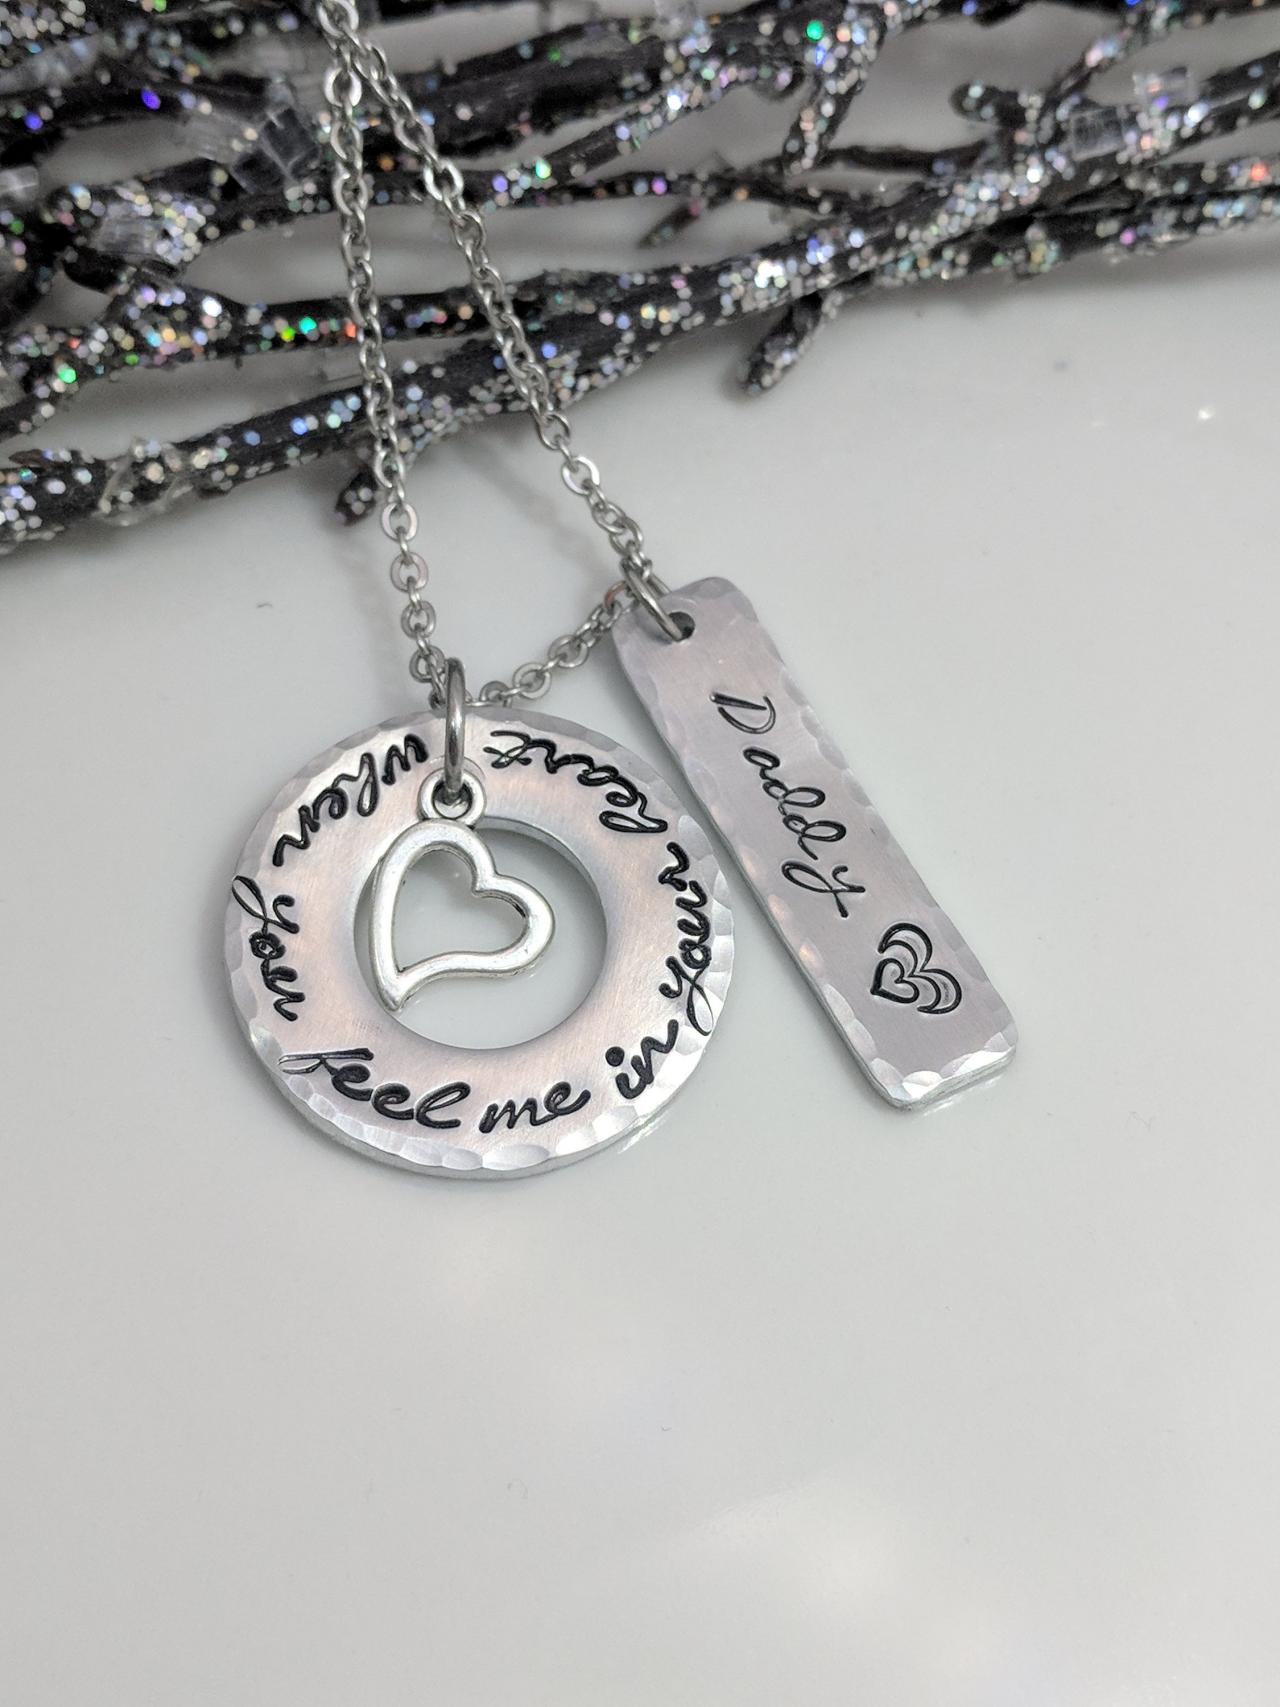 Hand Stamped Necklace, When You Feel Me In Your Heart- Loss Necklace- Keepsake Hand Stamped Jewelry- Memorial- Grief Gift- Remembrance-